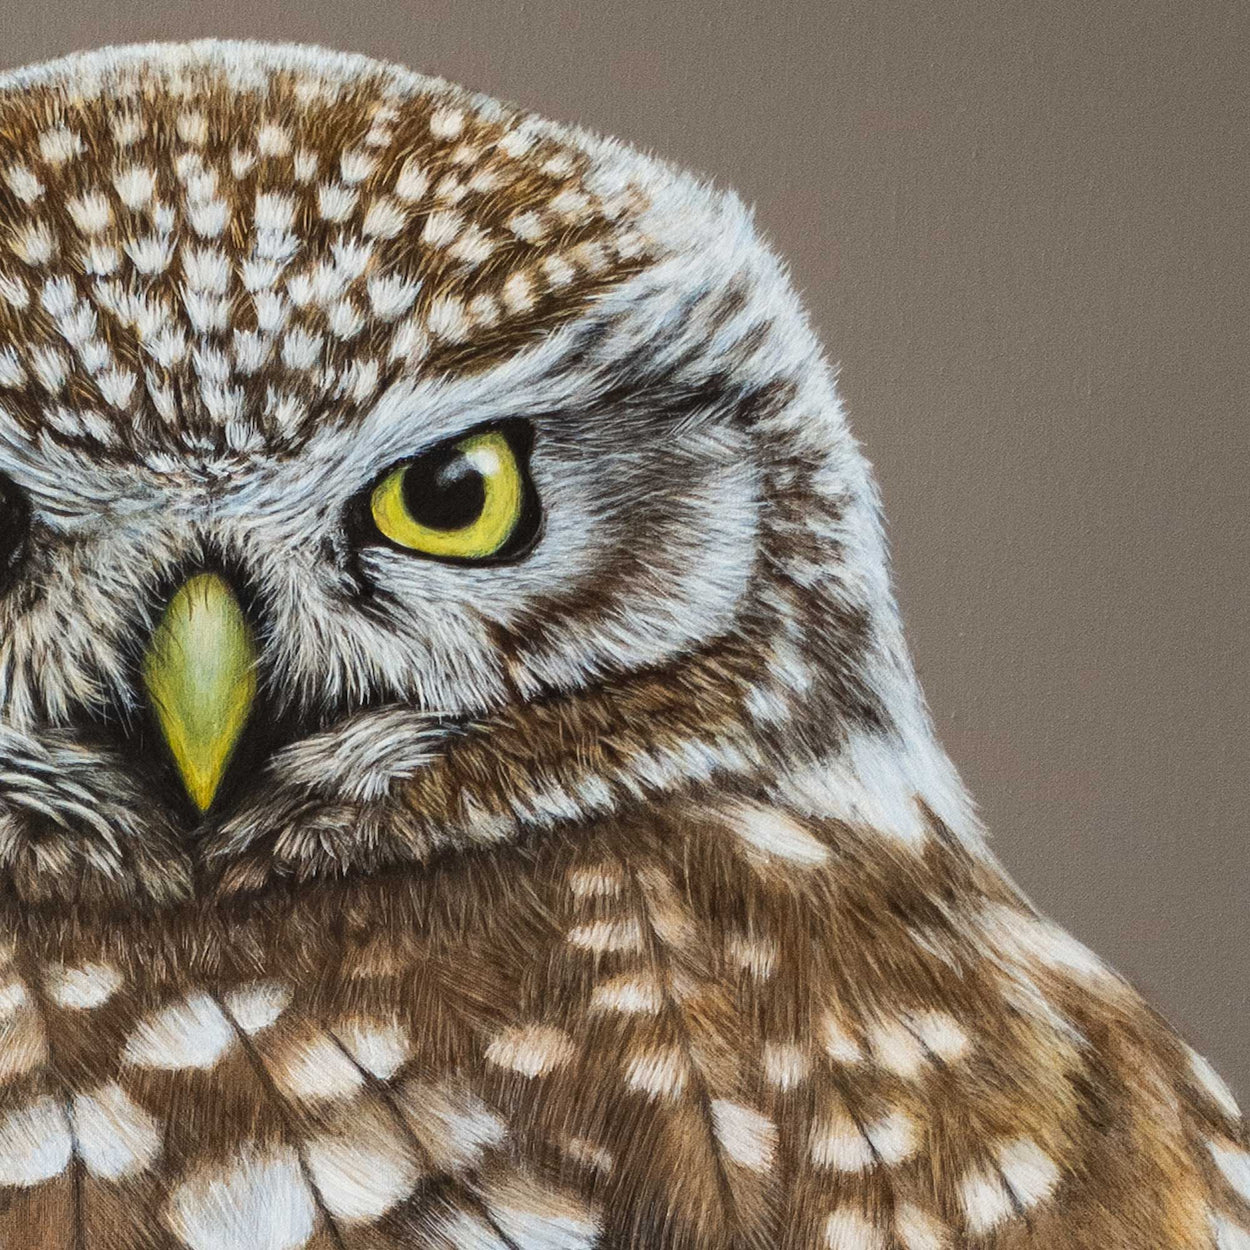 Close-up detail of little owl painting eye, beak and head